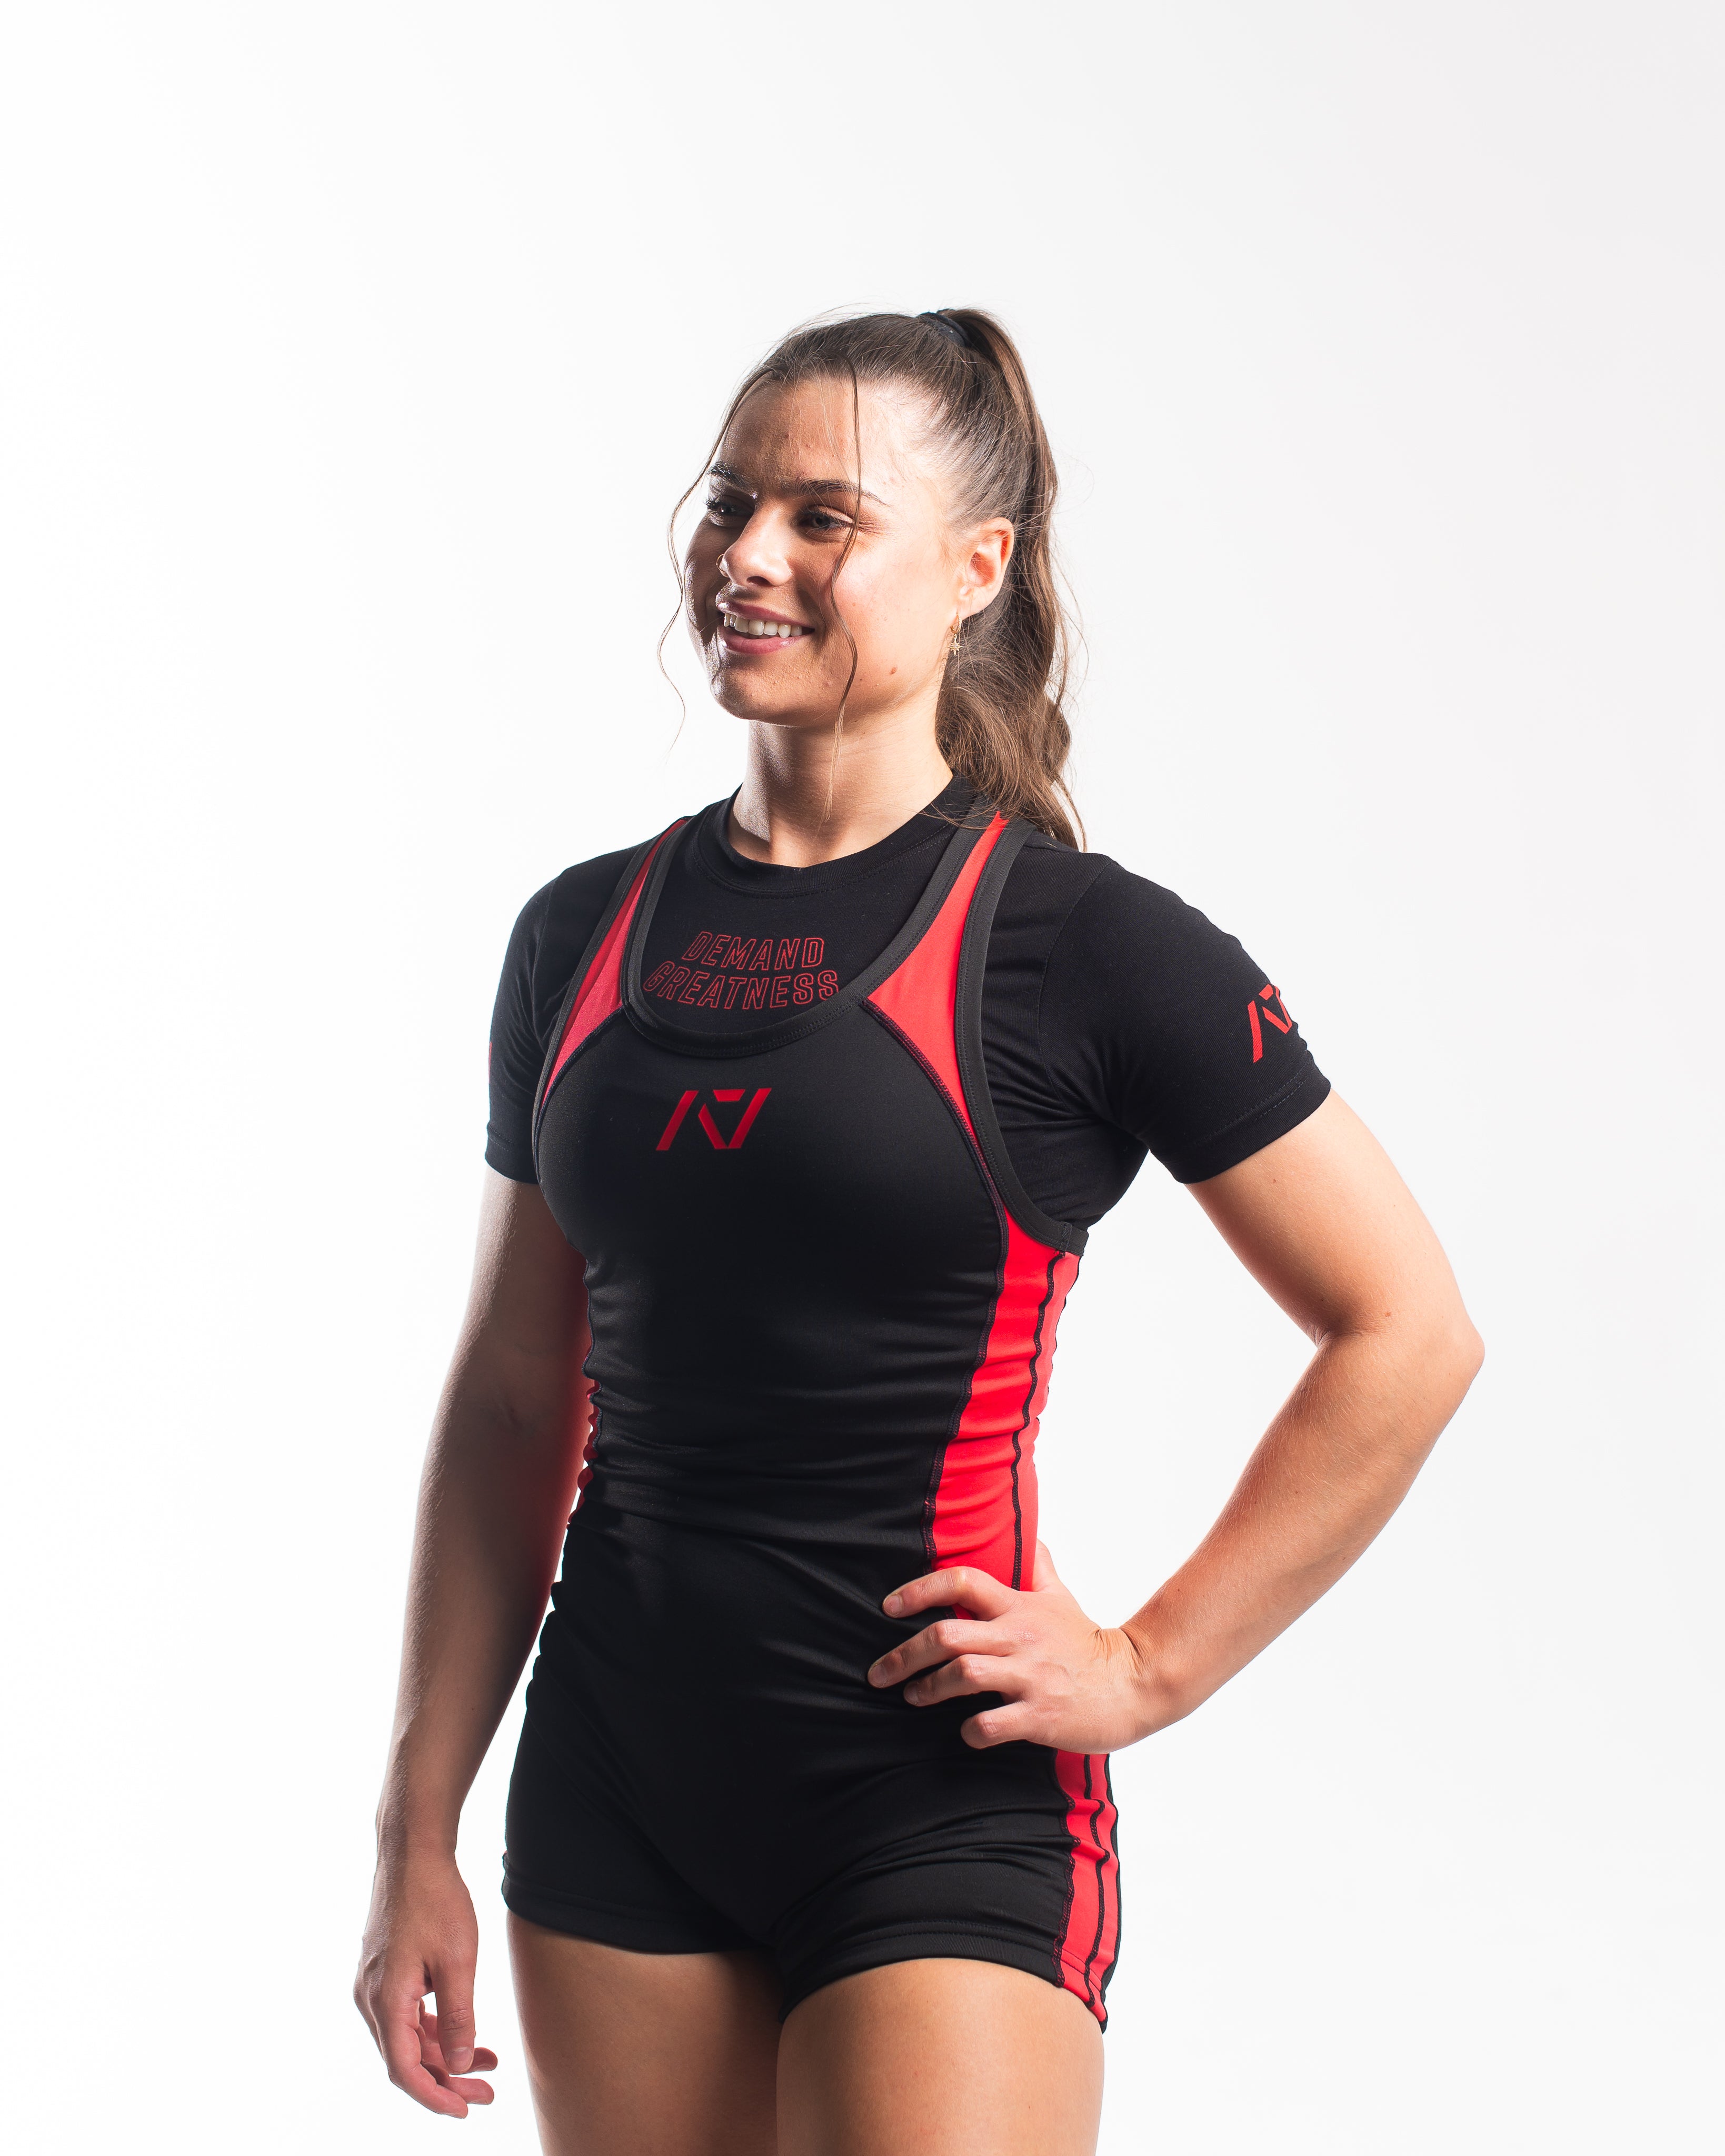 A7 IPF Approved Red Dawn Luno singlet with extra lat mobility, side panel stitching to guide the squat depth level and curved panel design for a slimming look. The Women's cut singlet features a tapered waist and additional quad room. The IPF Approved Kit includes Powerlifting Singlet, A7 Meet Shirt, A7 Zebra Wrist Wraps, A7 Deadlift Socks, Hourglass Knee Sleeves (Stiff Knee Sleeves and Rigor Mortis Knee Sleeves). Genouillères powerlifting shipping to France, Spain, Ireland, Germany, Italy, Sweden and EU.